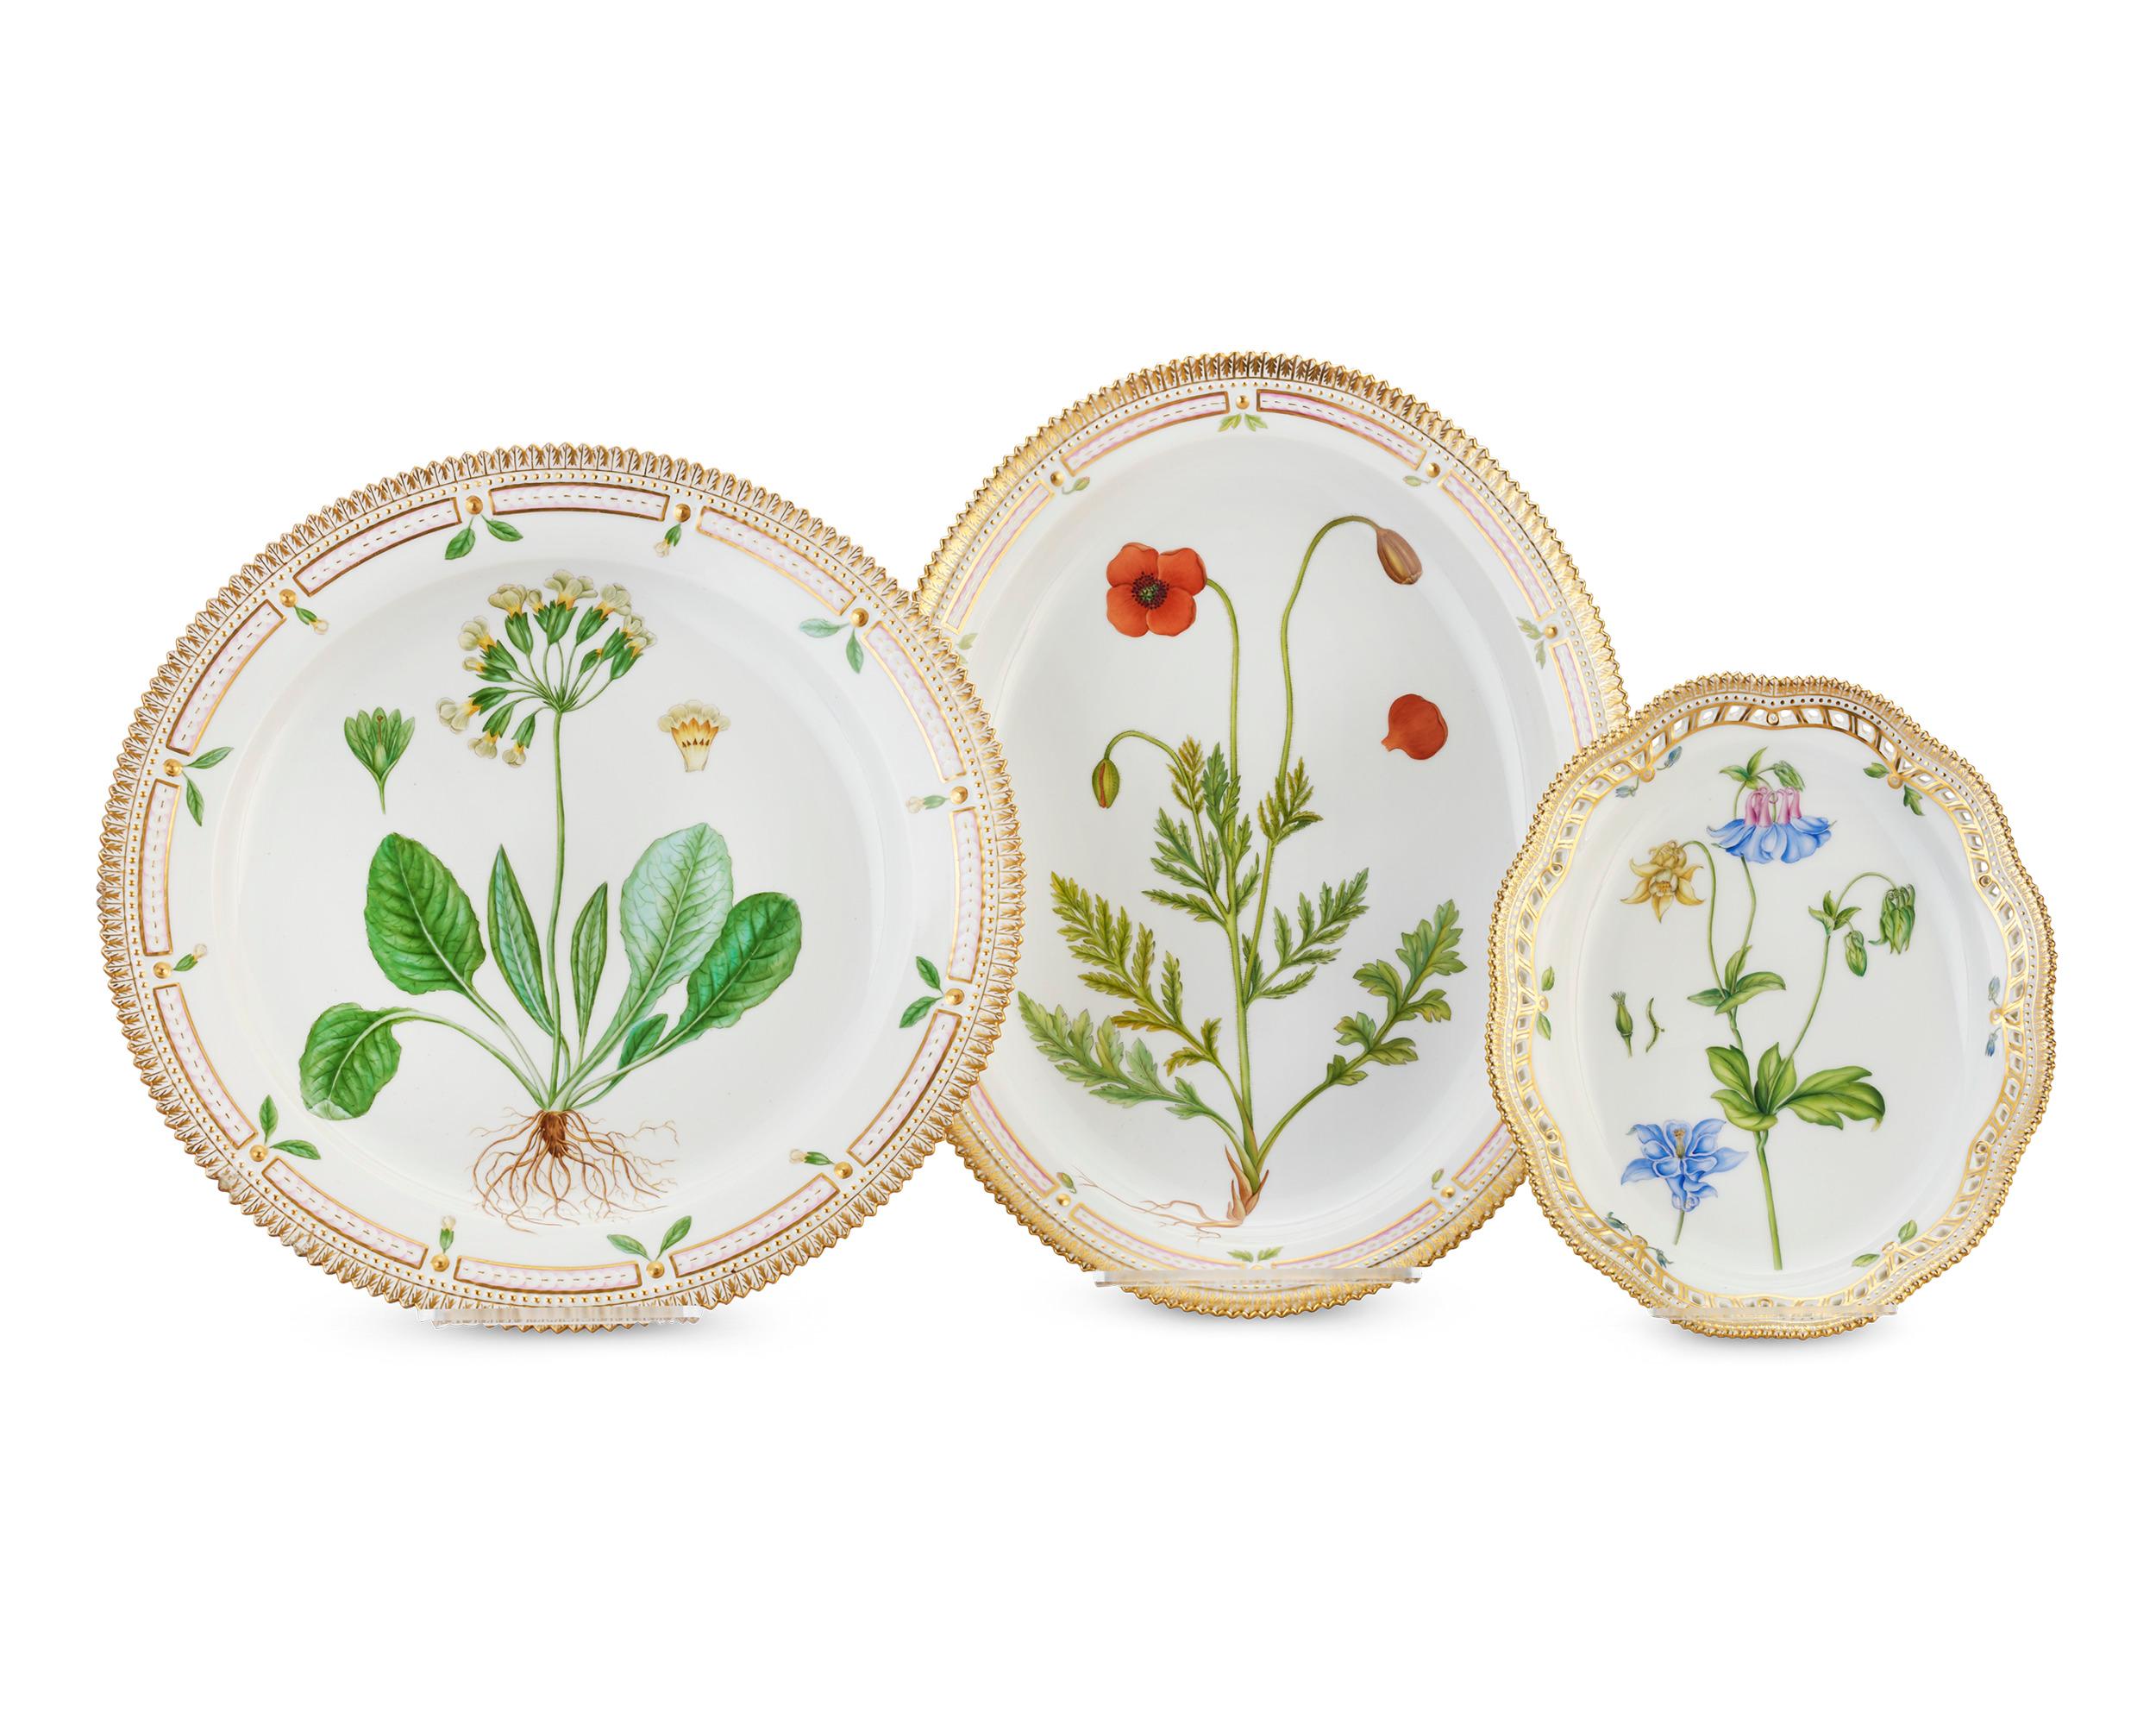 Crafted by the Royal Copenhagen Porcelain Manufactory, this 141-piece dinner service features one of the most prestigious porcelain patterns ever produced — the coveted Flora Danica pattern. The service for 12 boasts rich, hand painted botanical